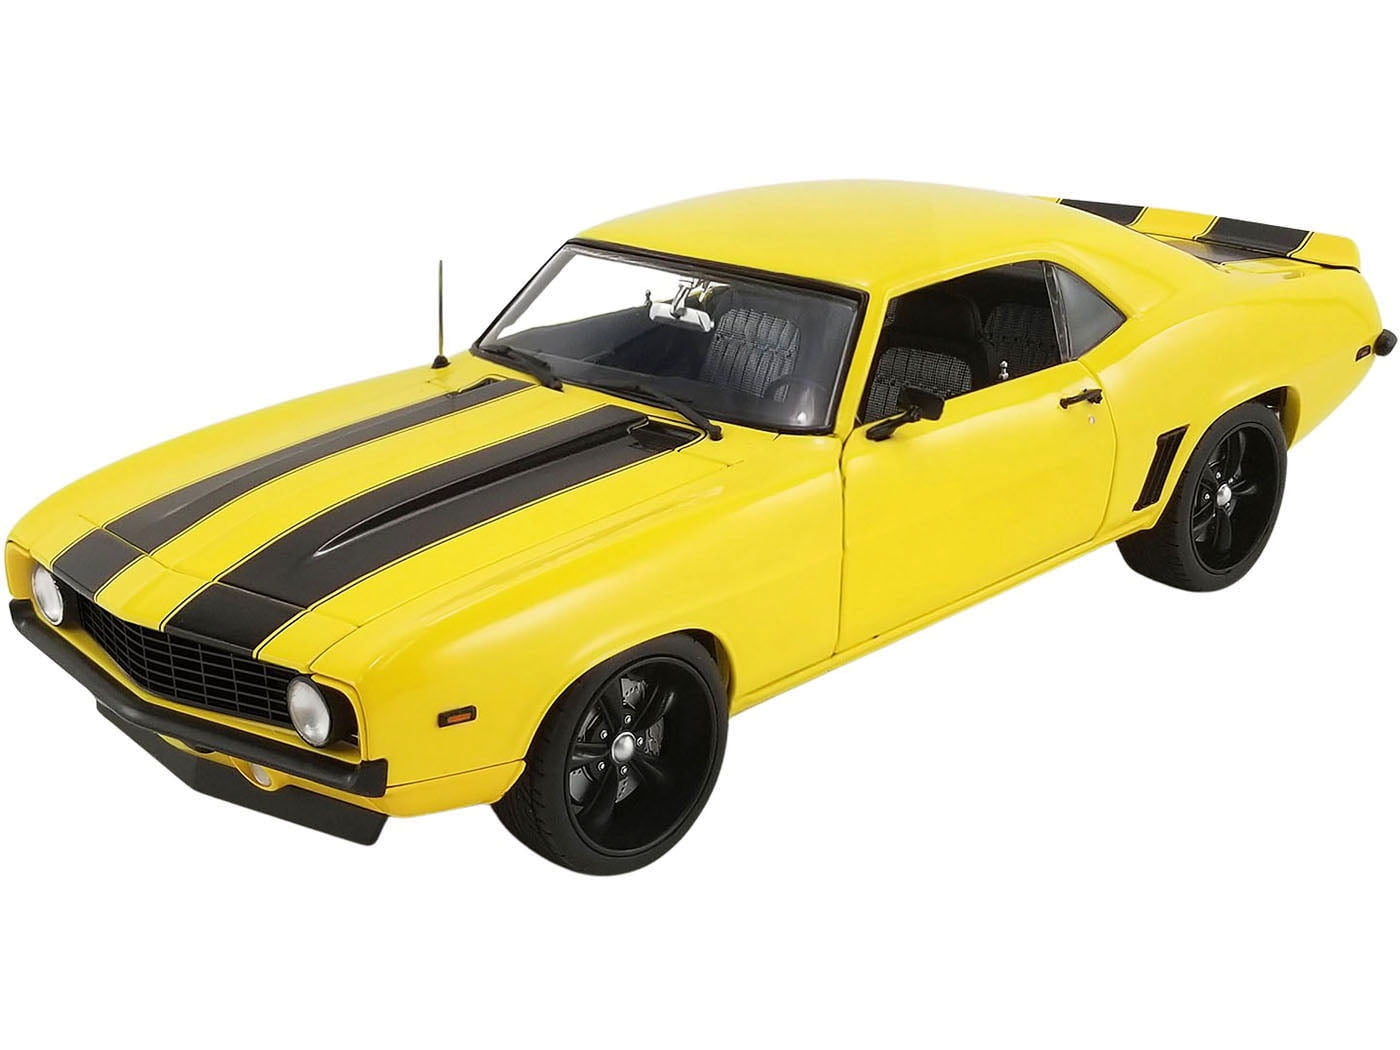 1969 Chevrolet Camaro ZL1 Coupe Barrett Jackson in 1:18 scale by HighWay 61 